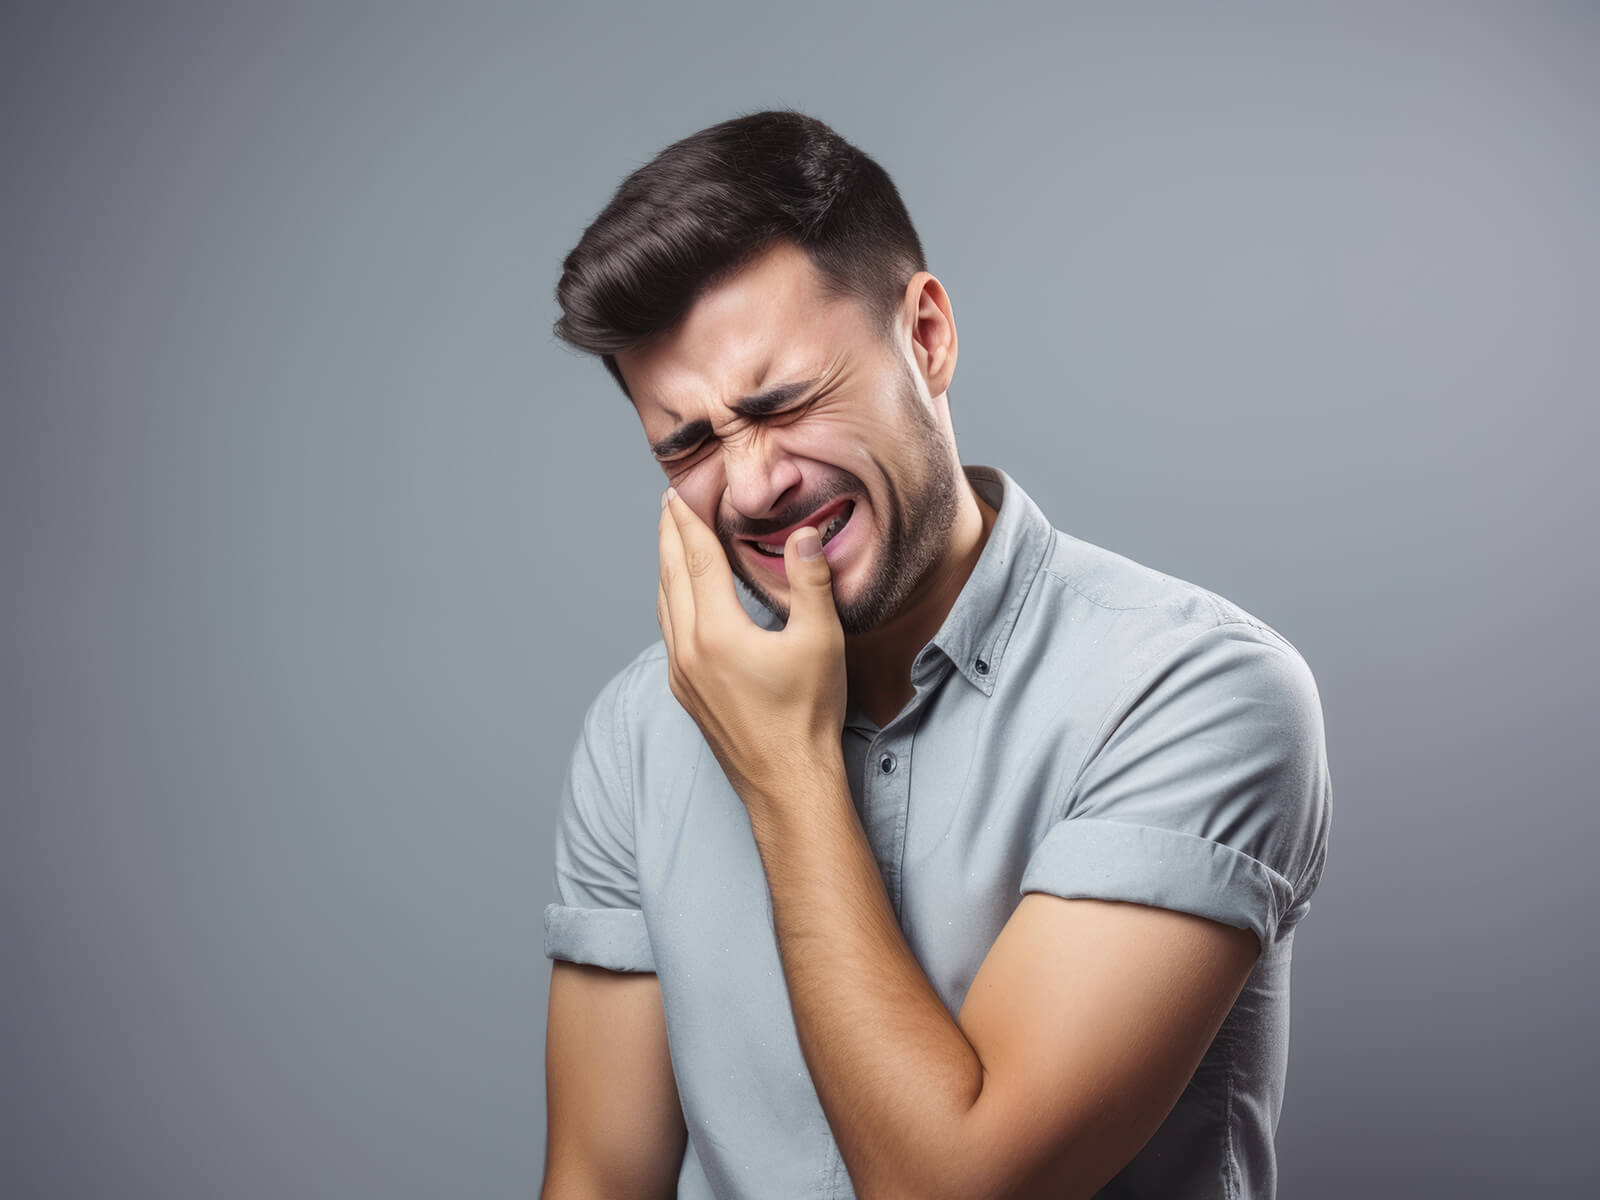 Emergency Dental Care: What To Do When You’re In Pain